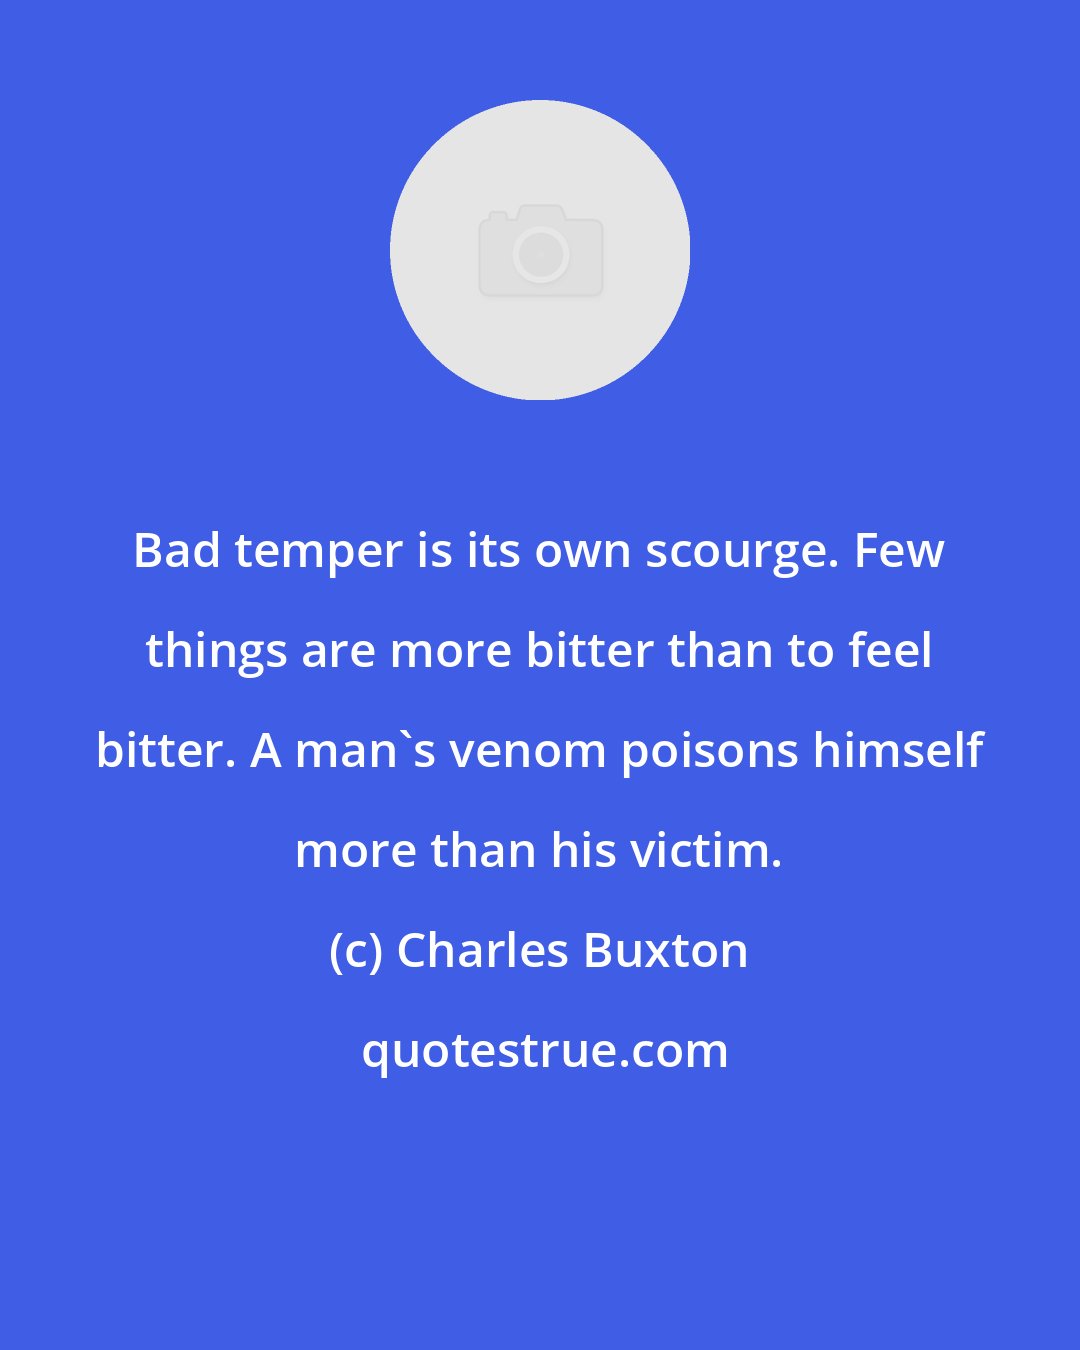 Charles Buxton: Bad temper is its own scourge. Few things are more bitter than to feel bitter. A man's venom poisons himself more than his victim.